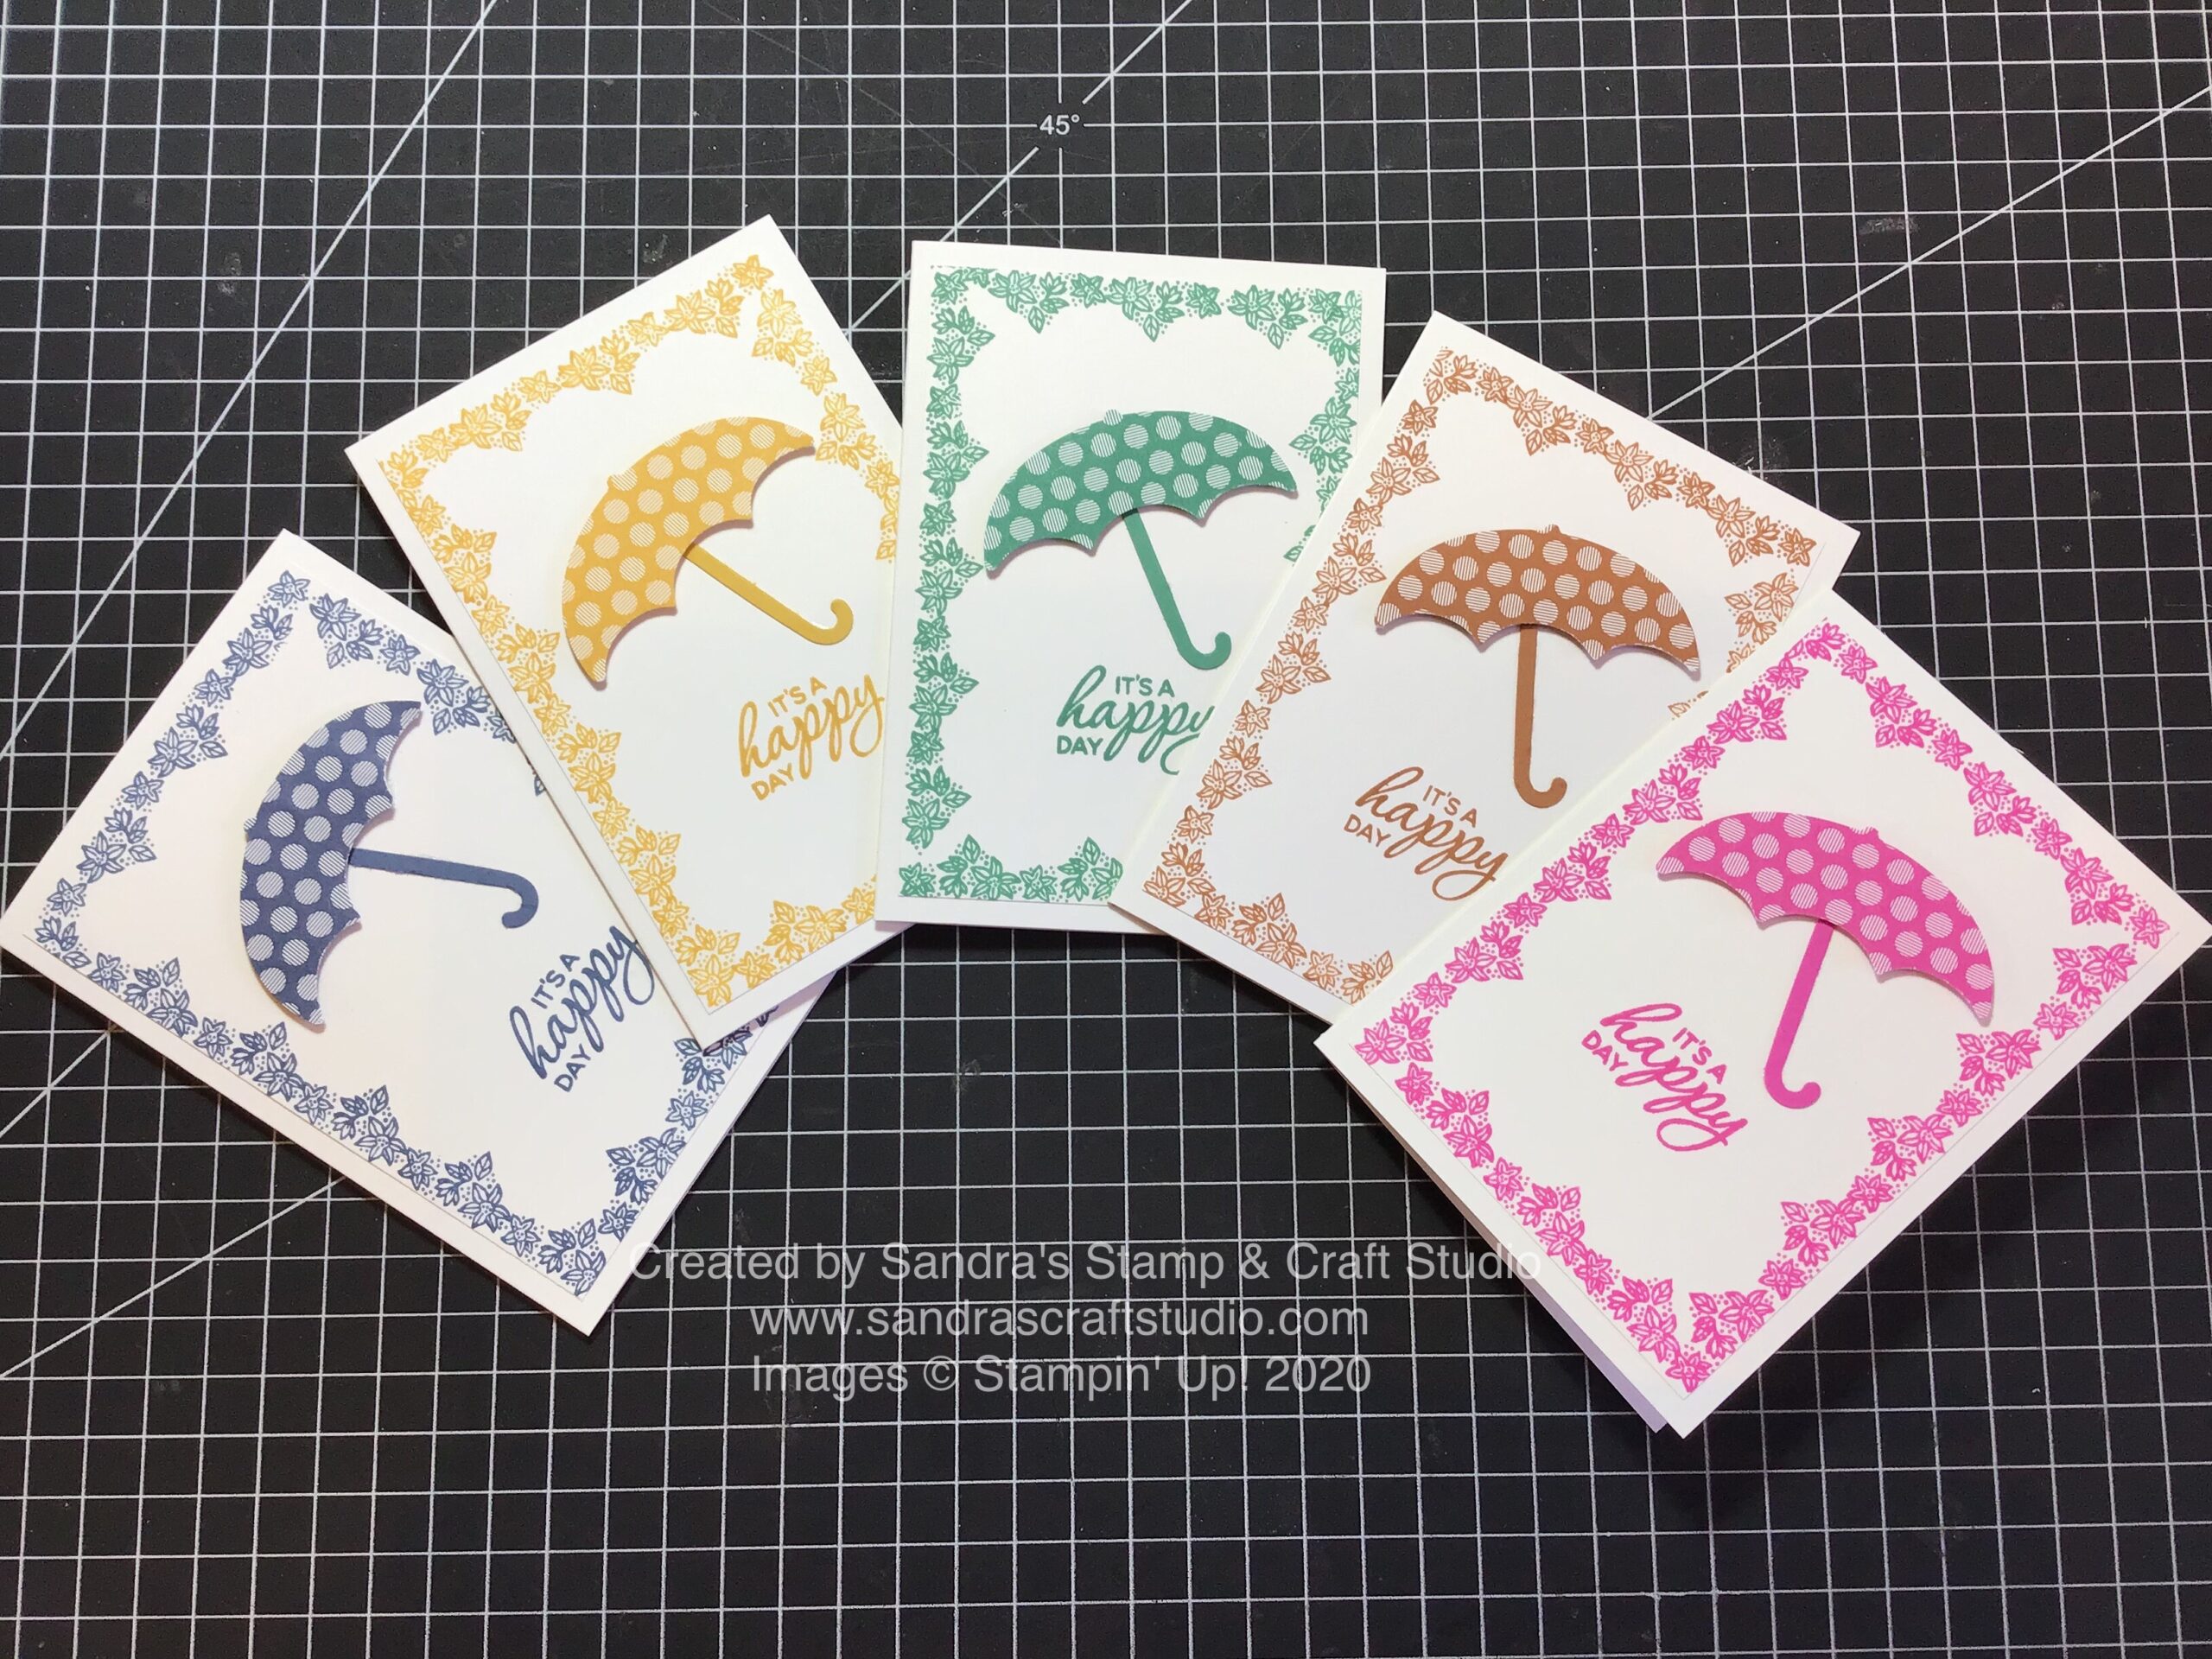 Stamptastic Friends – #simplestamping with Pretty Parasol